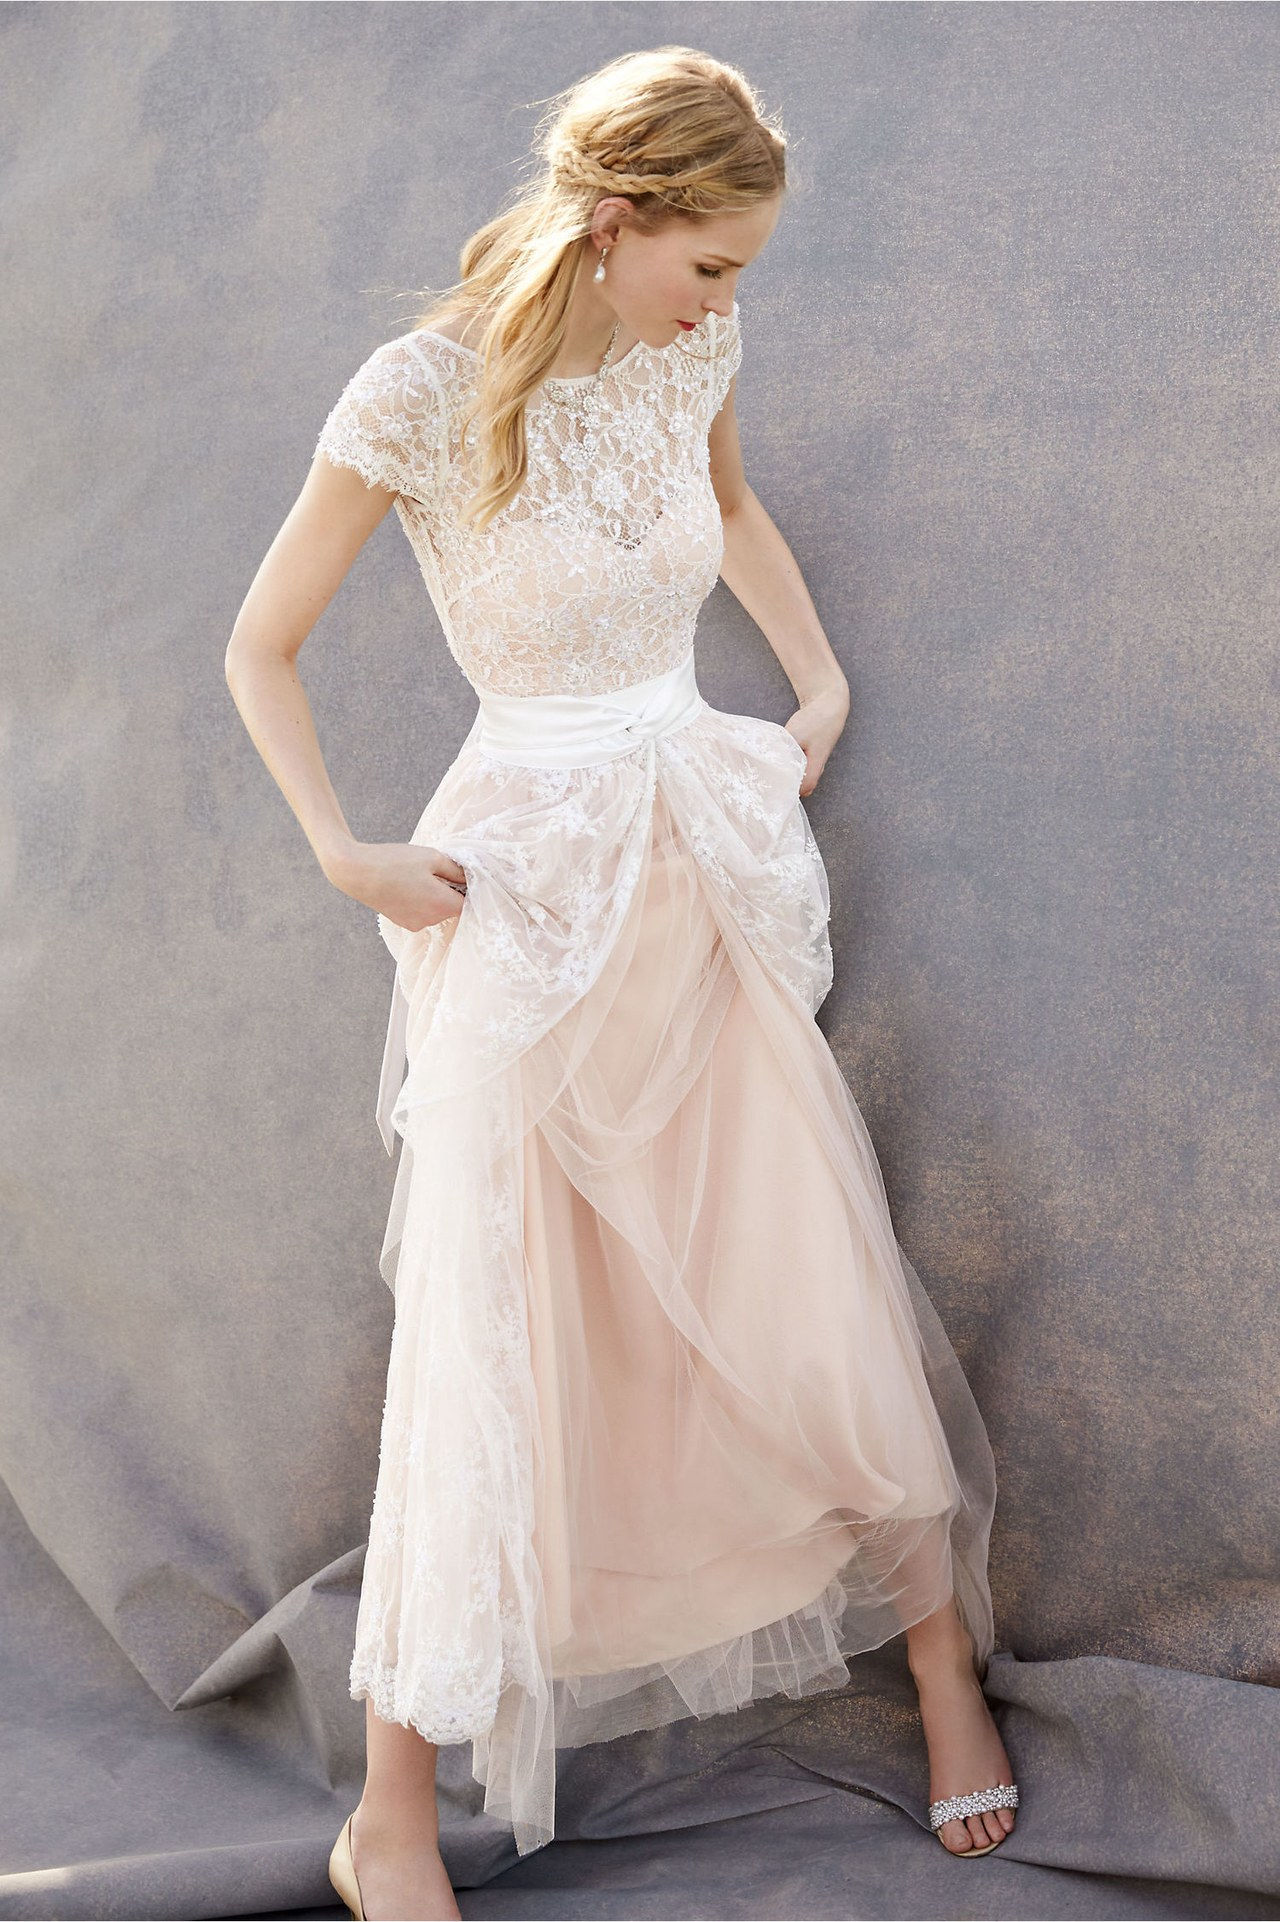 2E 2 in 1 wedding dresses wedding gowns mix and match wedding dresses bhldn 0430 courtesy